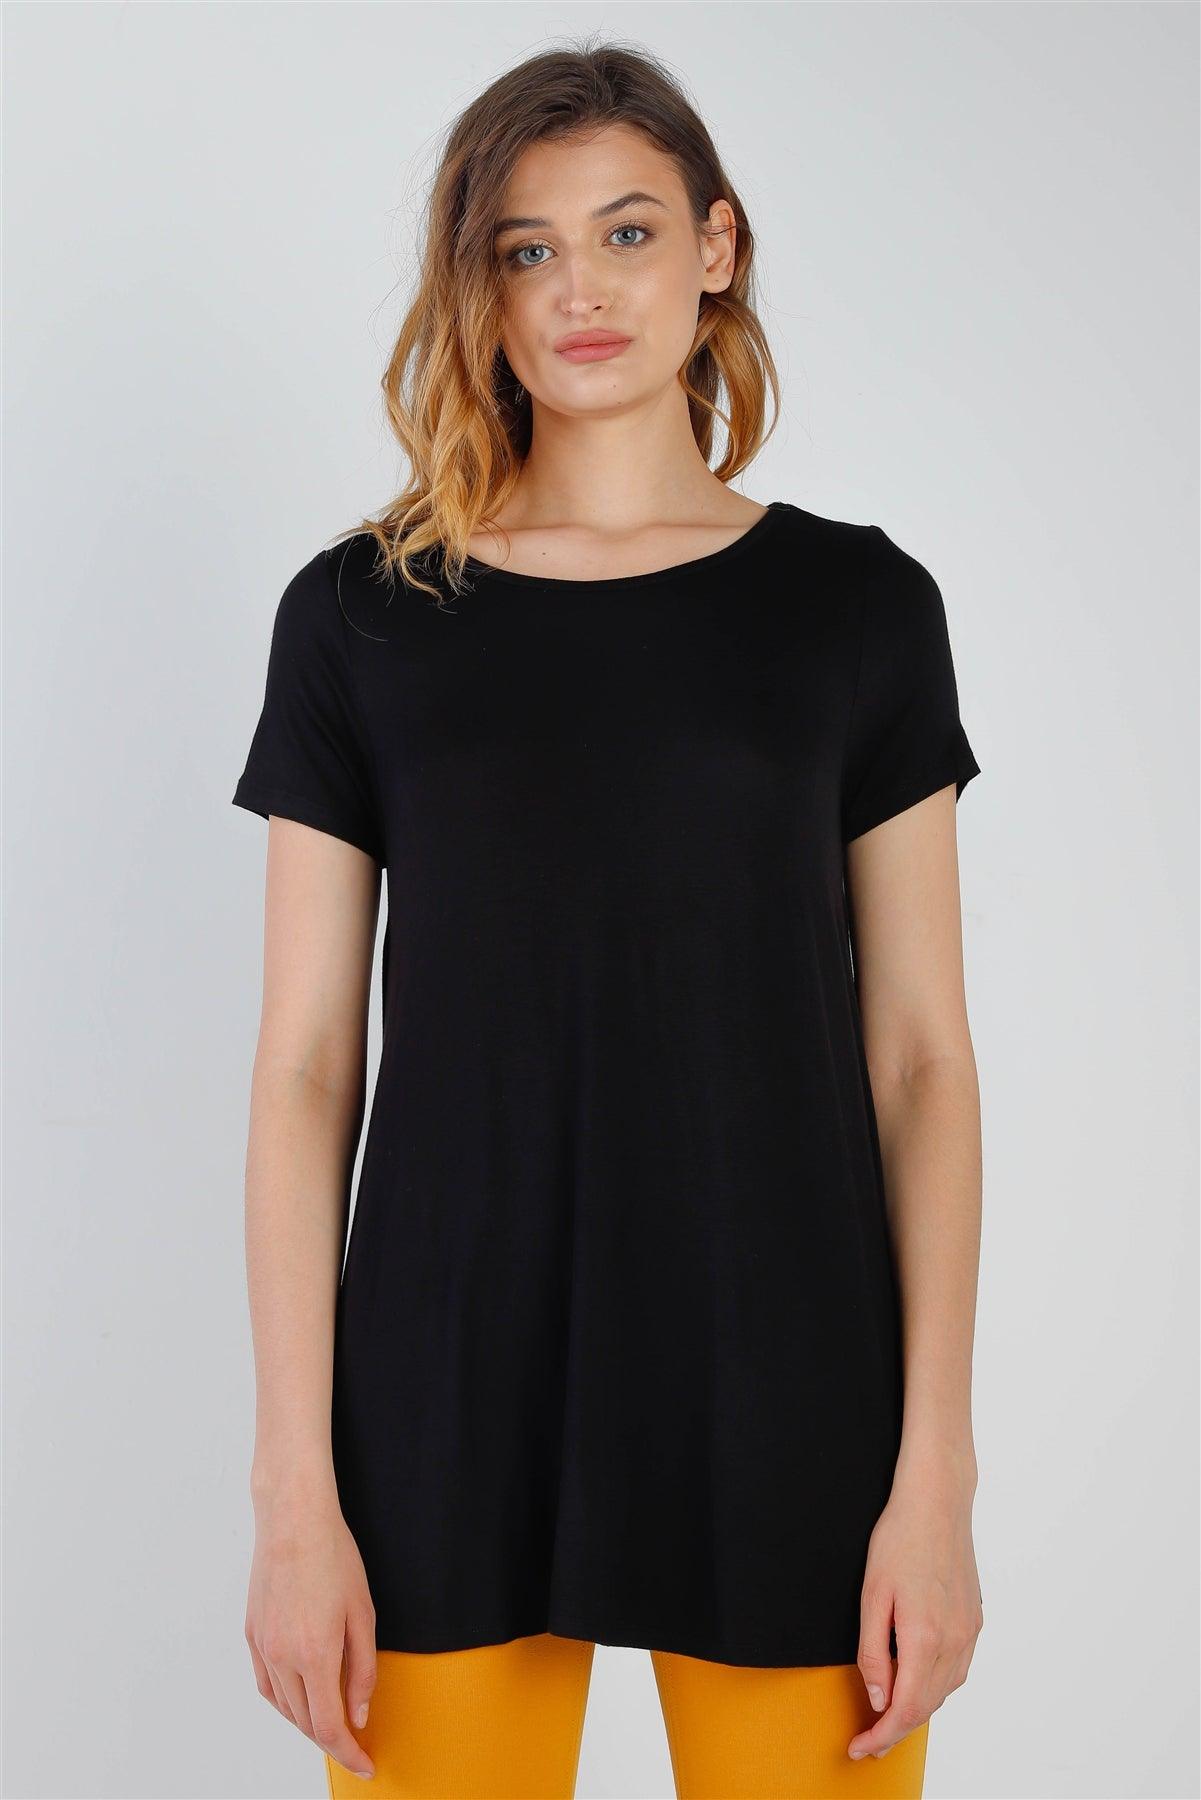 Black Short Sleeve Relaxed Fit Top /1-2-2-1